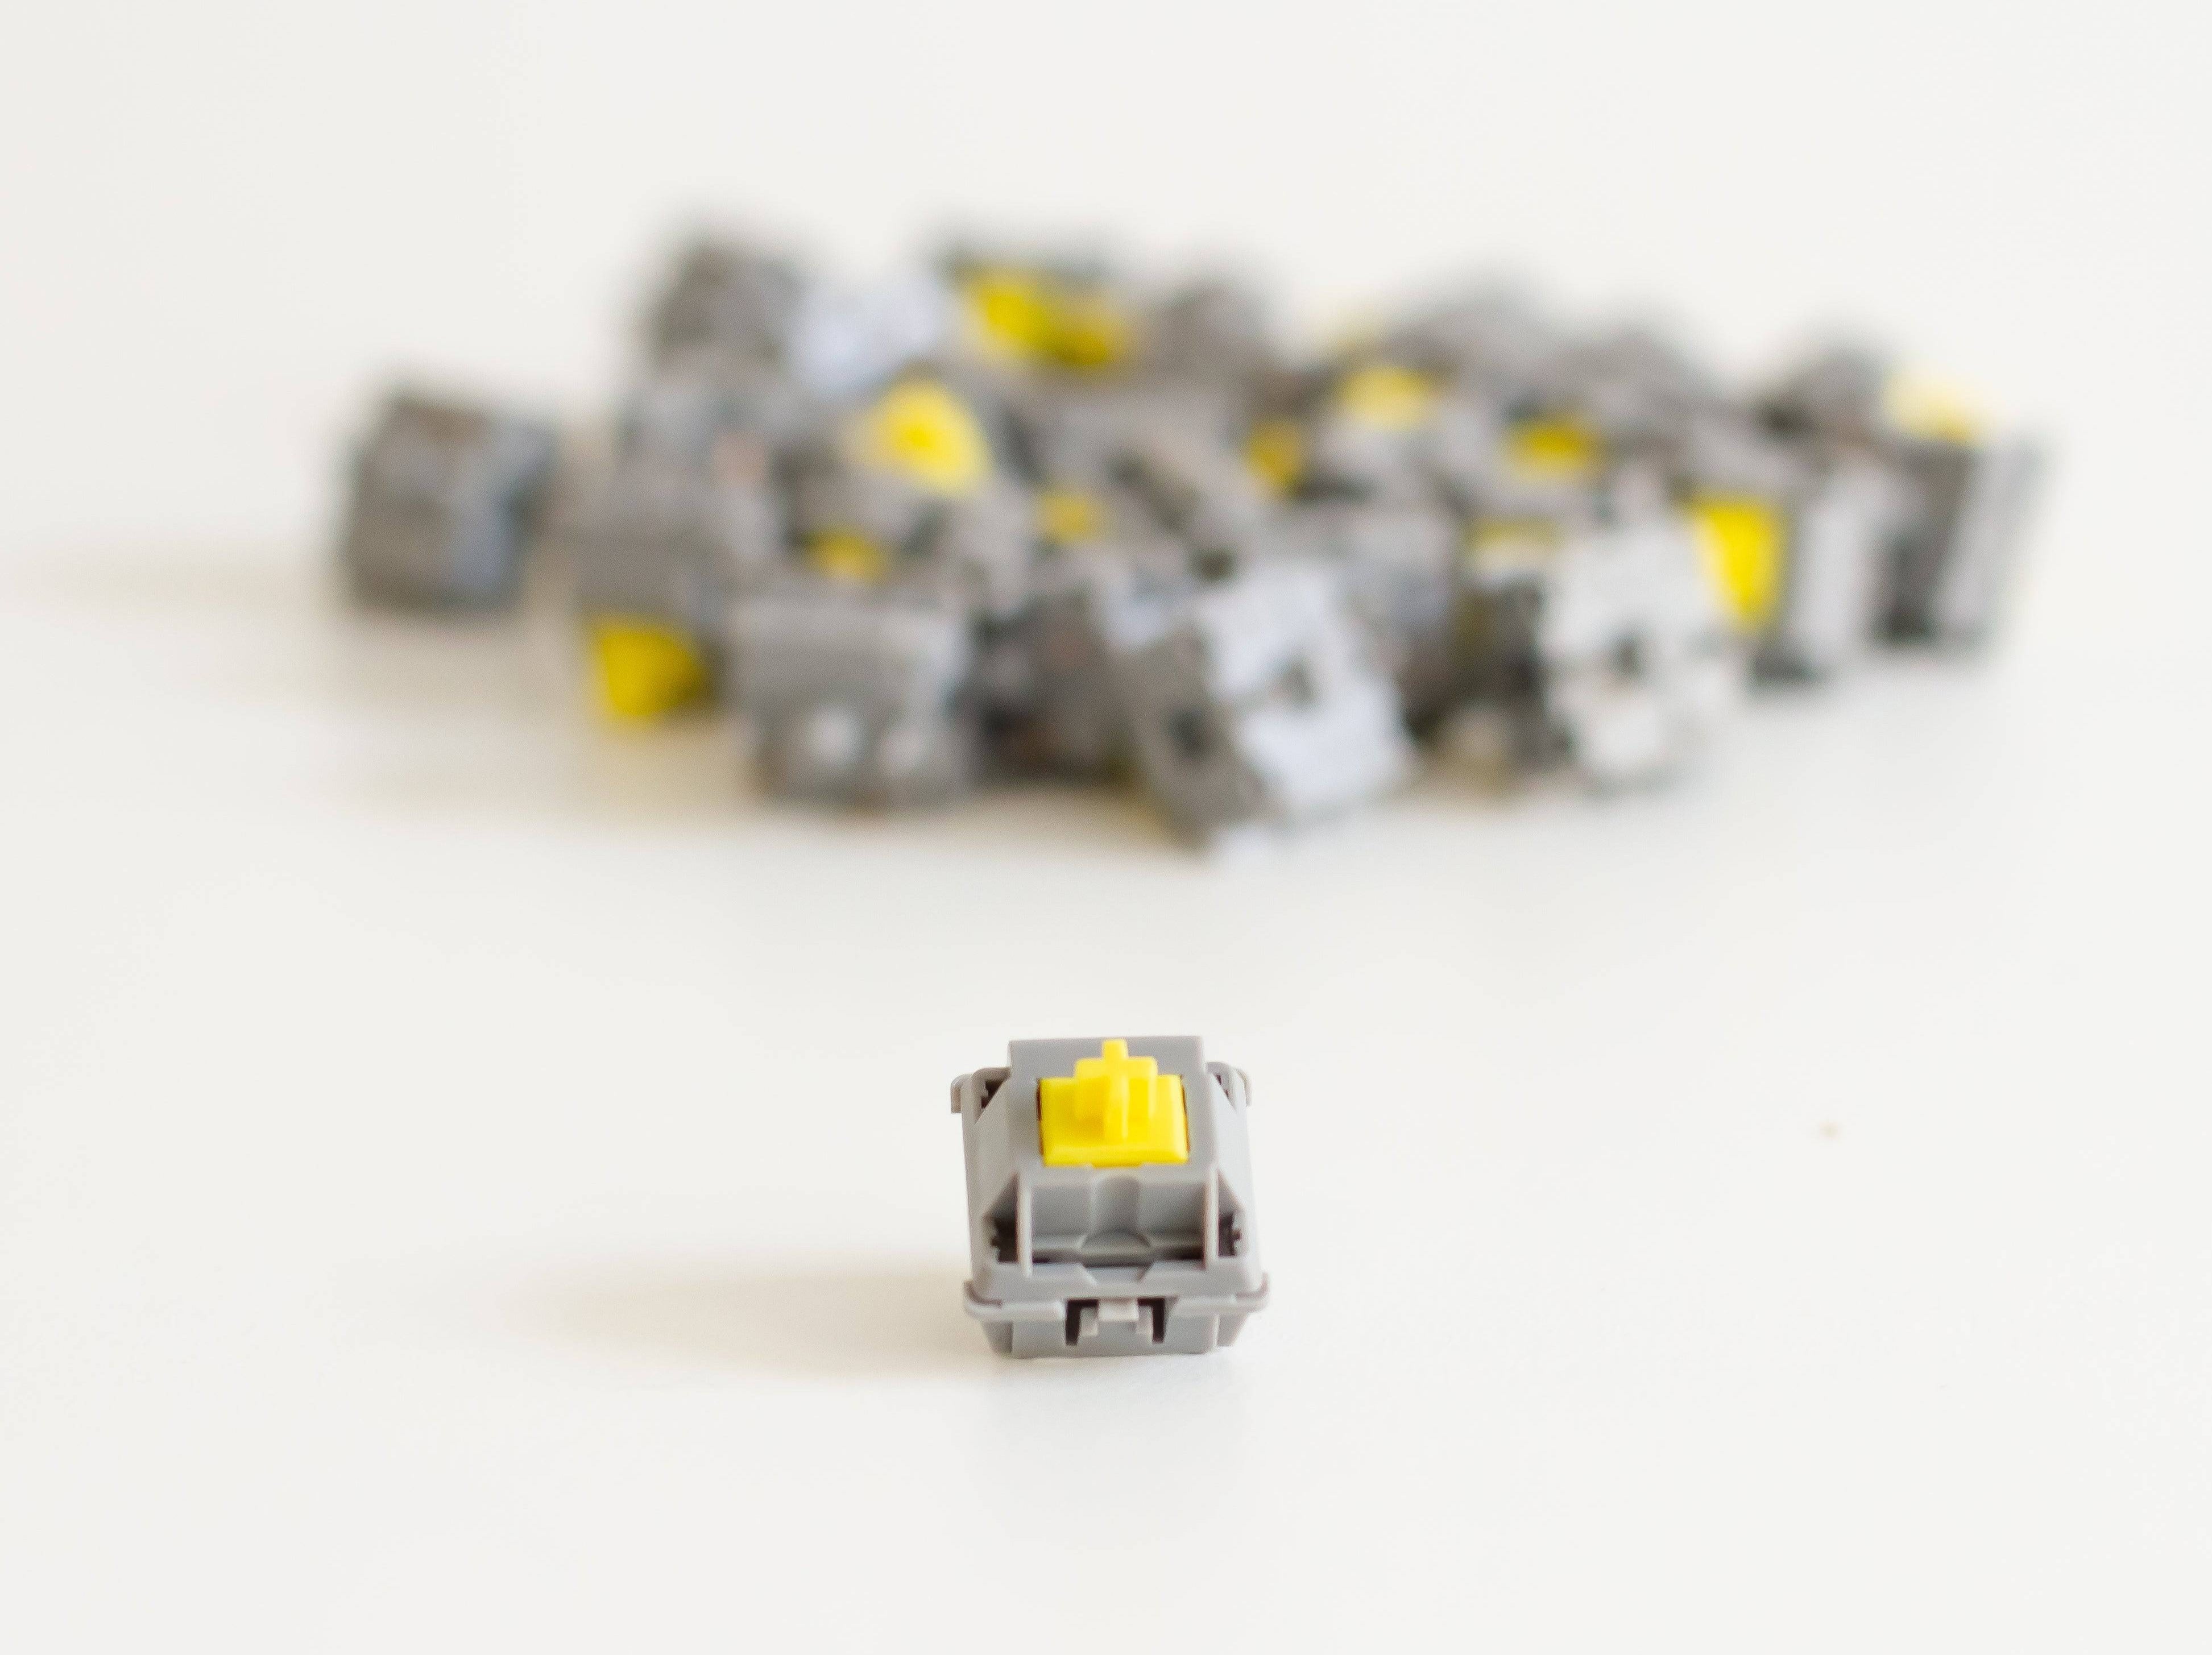 A batch of JWK Durock tactile POM T1 sunflower mechanical keyboard switches with one switch at the front.